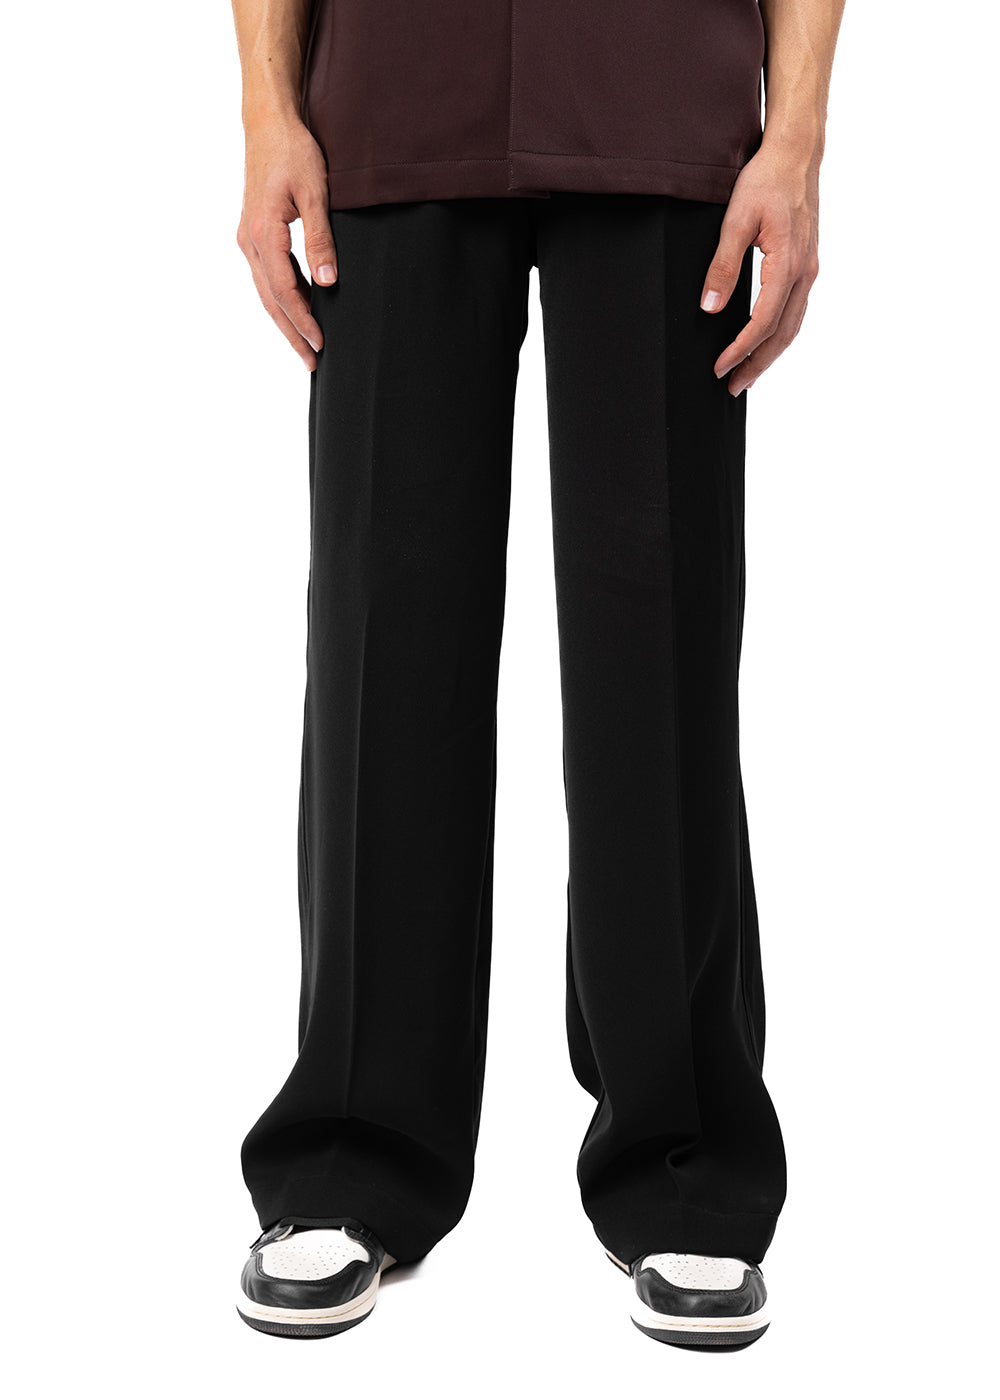 Endless Comfort Straight-Leg Pull-On Pants - Coldwater Creek